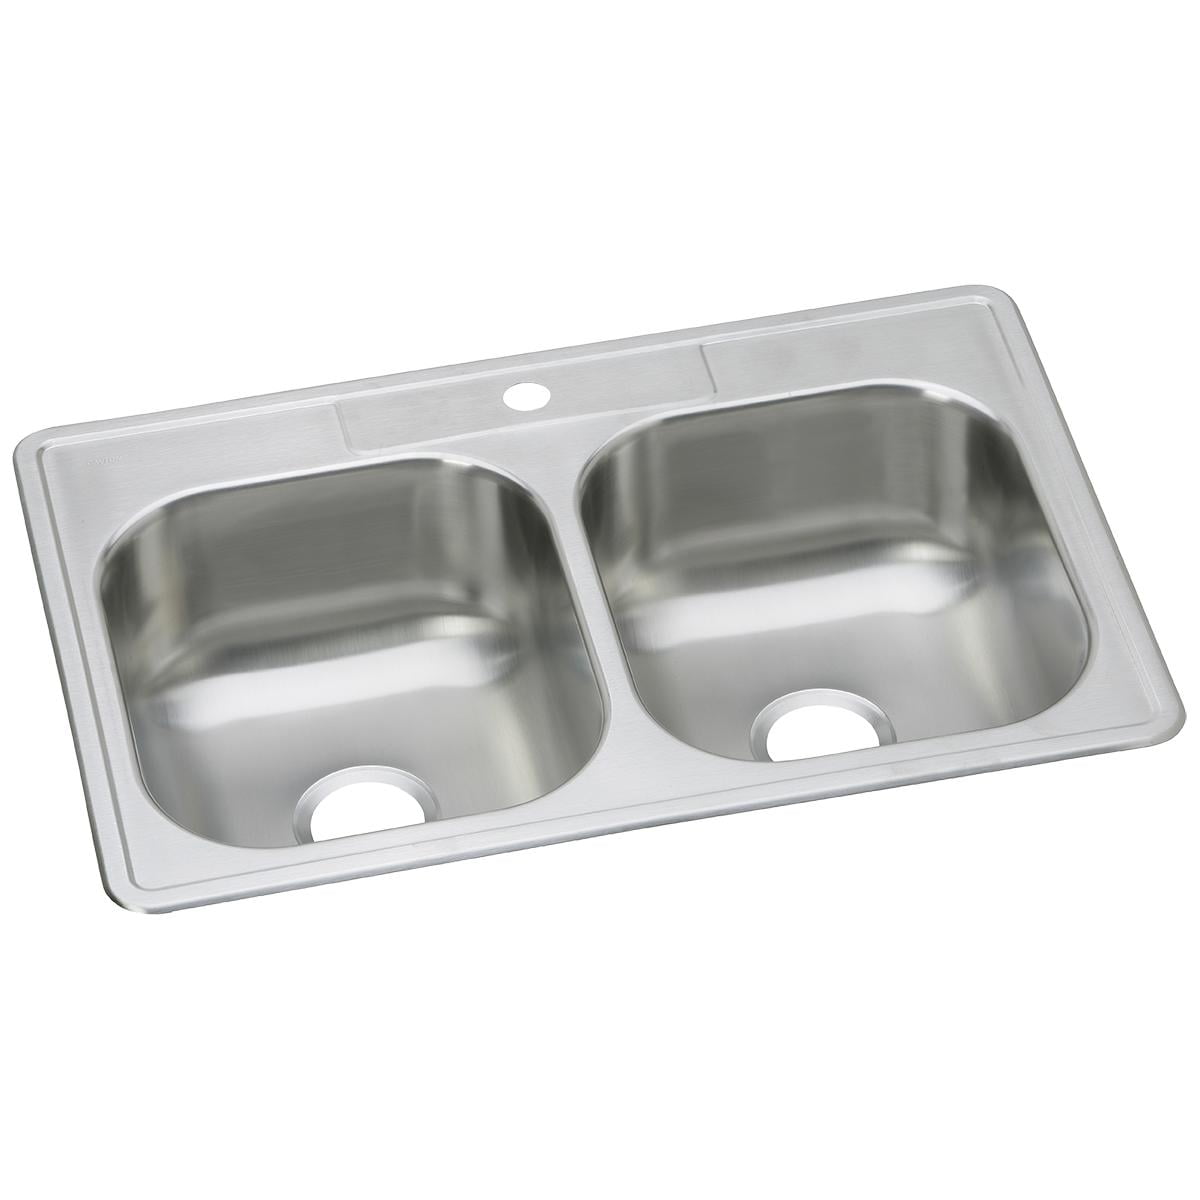 Elkay GE233223 Dayton Equal Double Bowl Top Mount Stainless Steel Sink for sale online